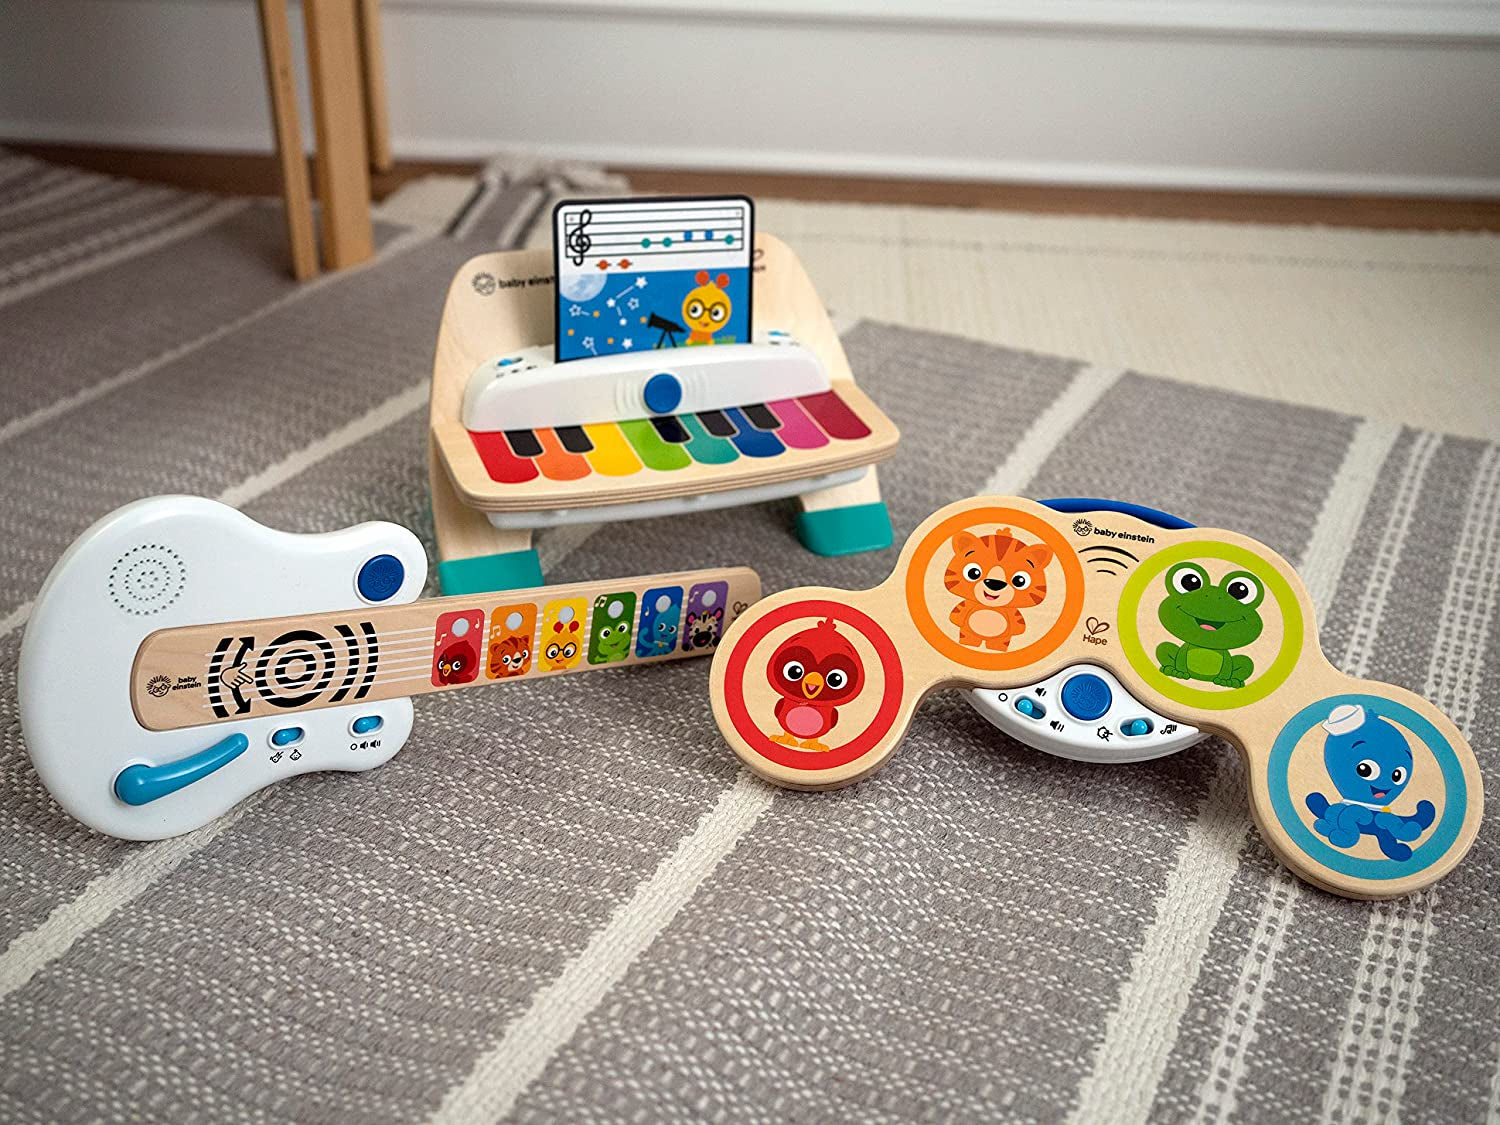 and Hape Magic Touch Piano Wooden Musical Toddler Toy, Age 6 Months and Up